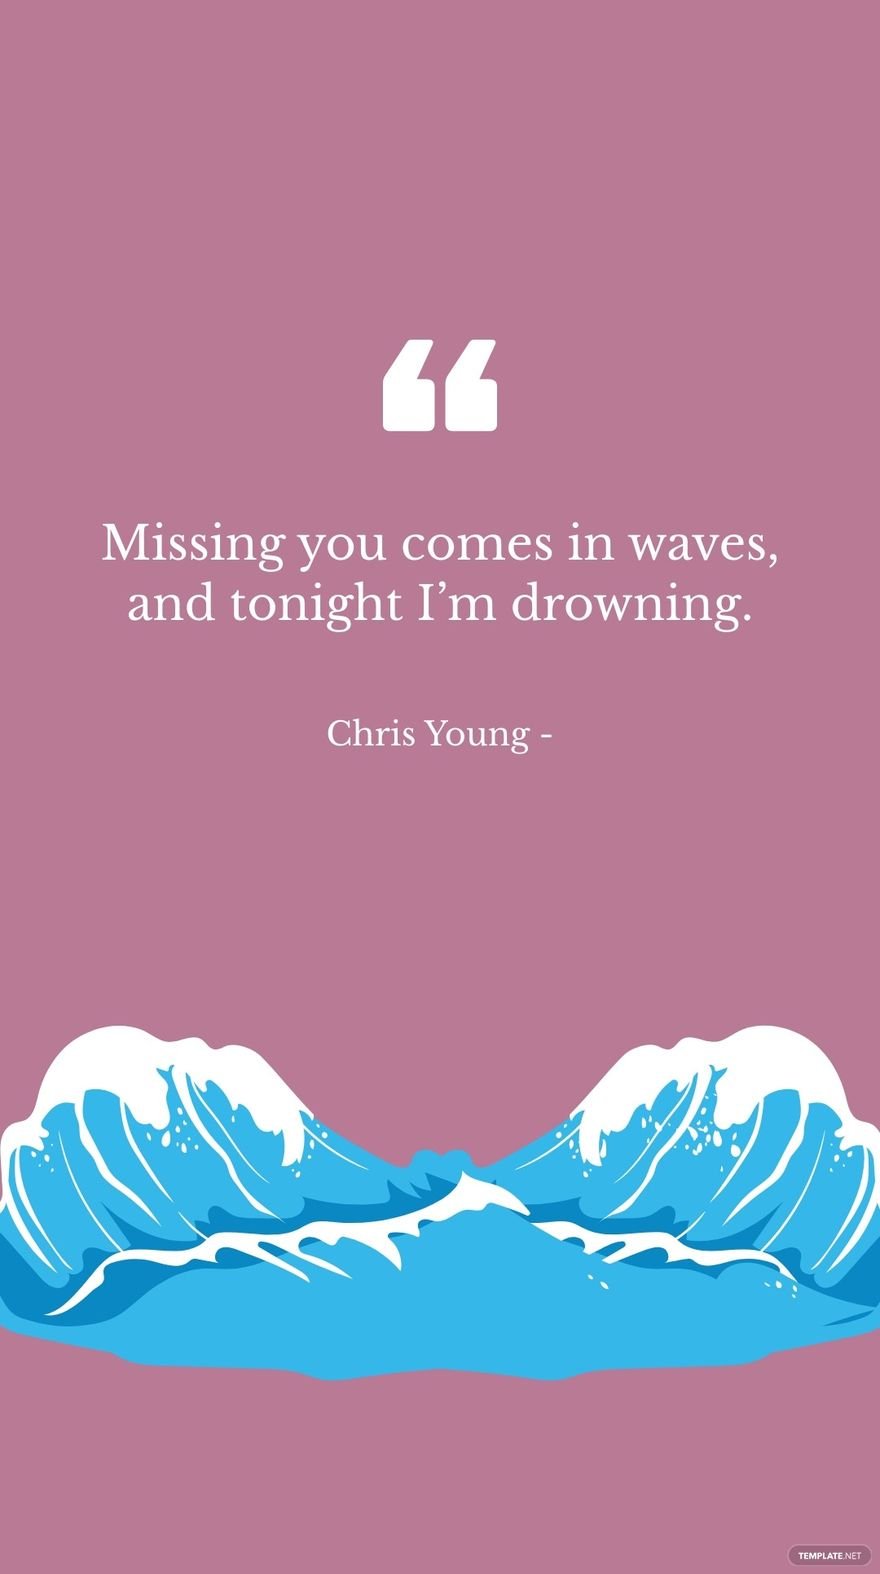 Free Chris Young - Missing you comes in waves, and tonight I’m drowning.